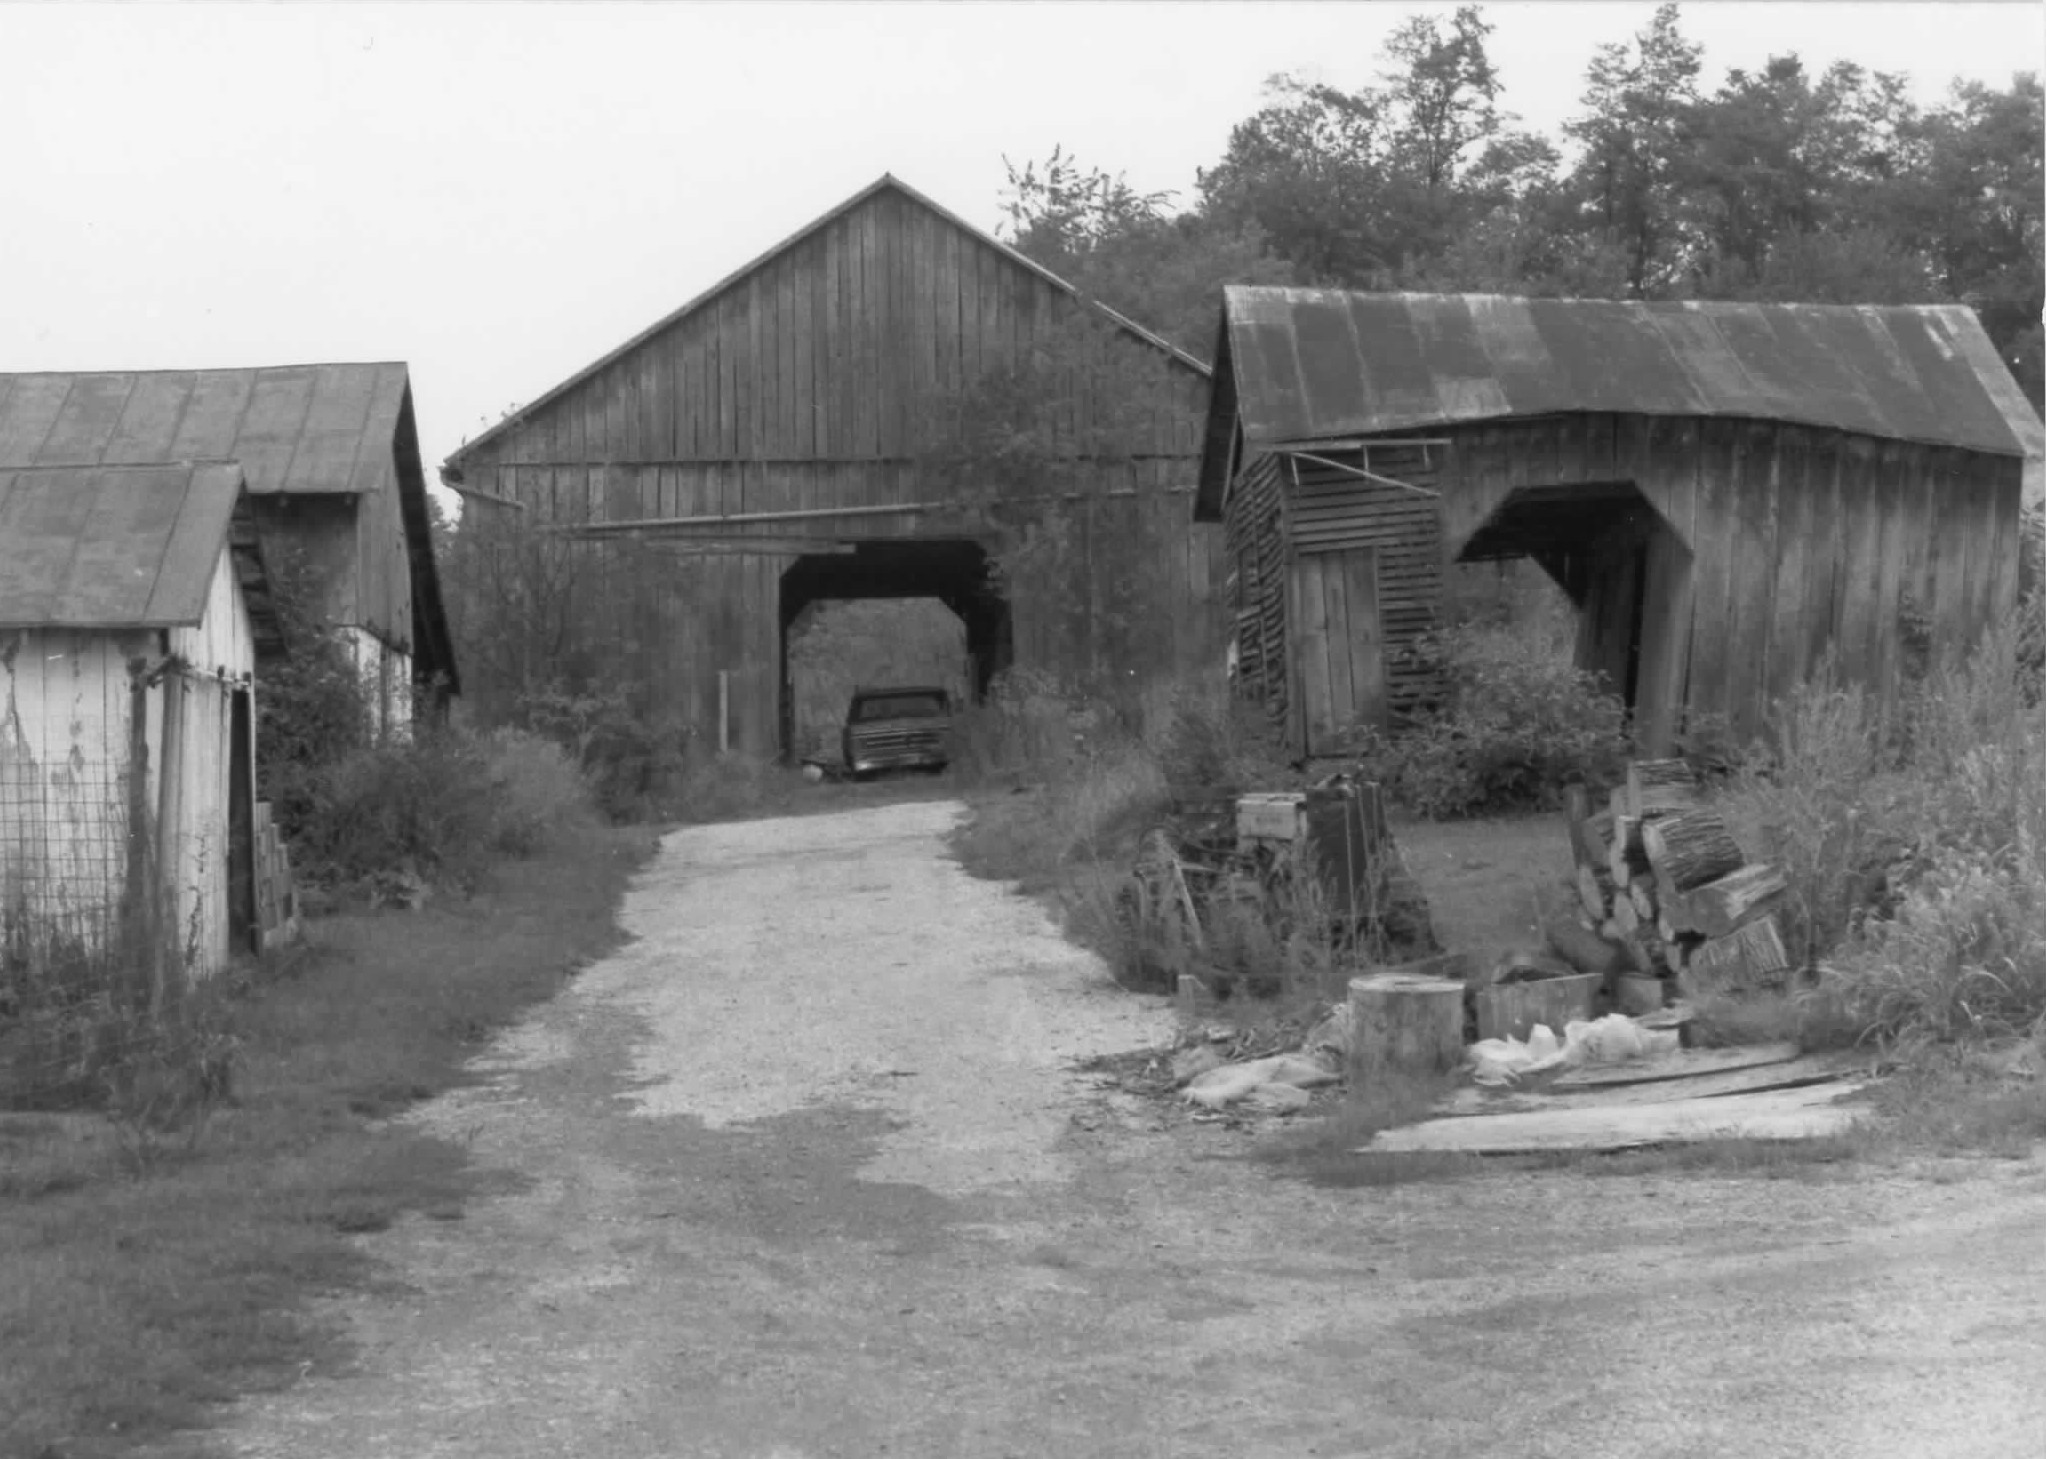 Barn and Outbuildings. Photo credit: Gibson Worsham, 1986